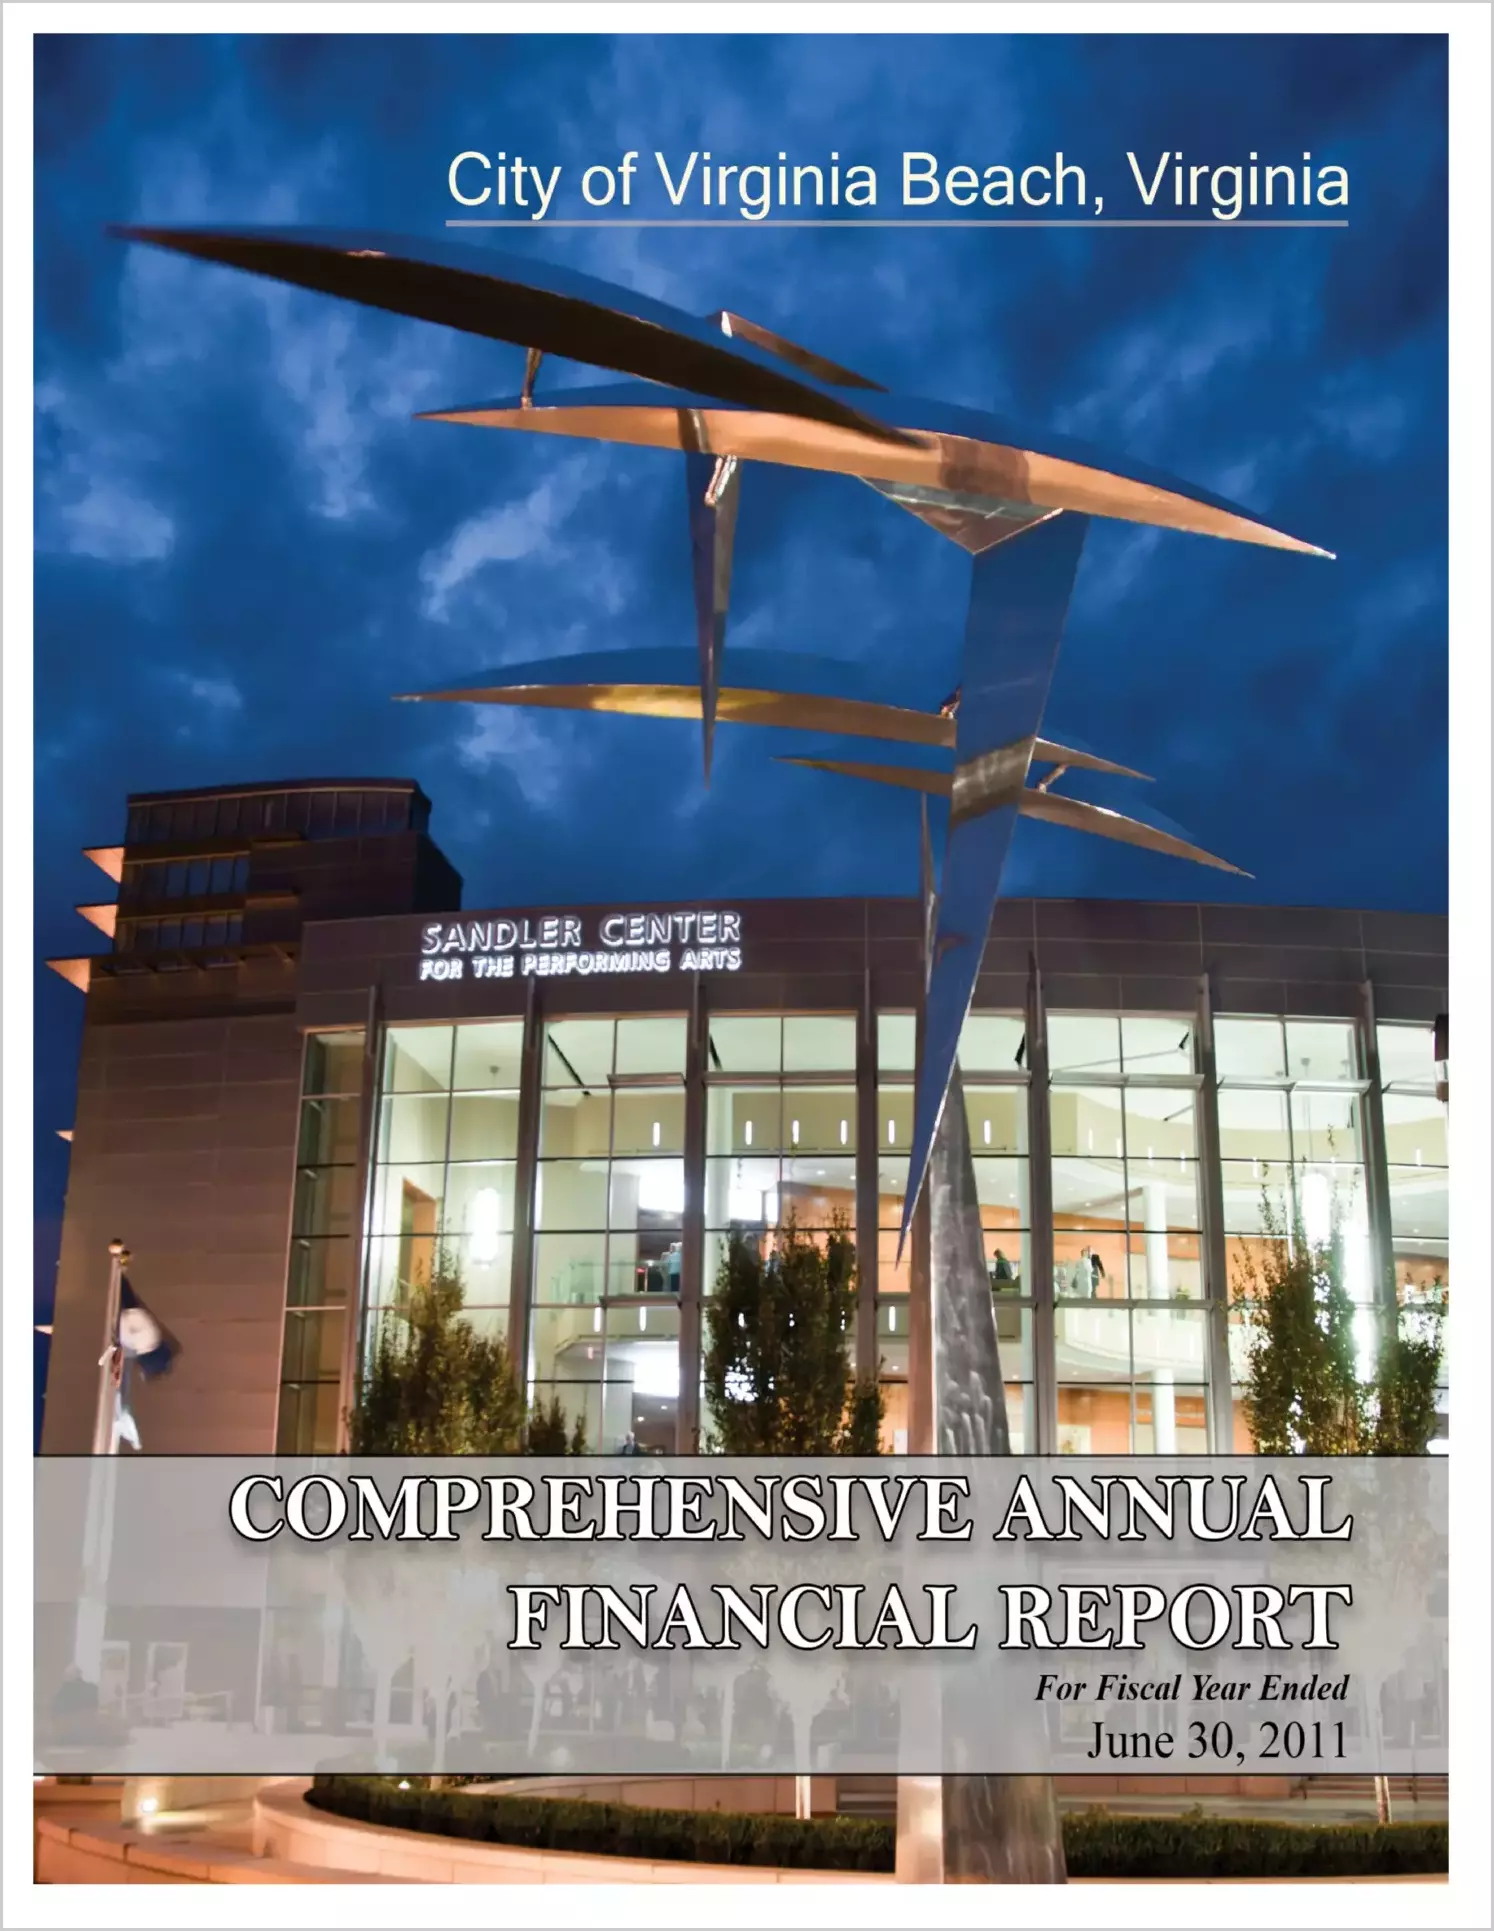 2011 Annual Financial Report for City of Virginia Beach